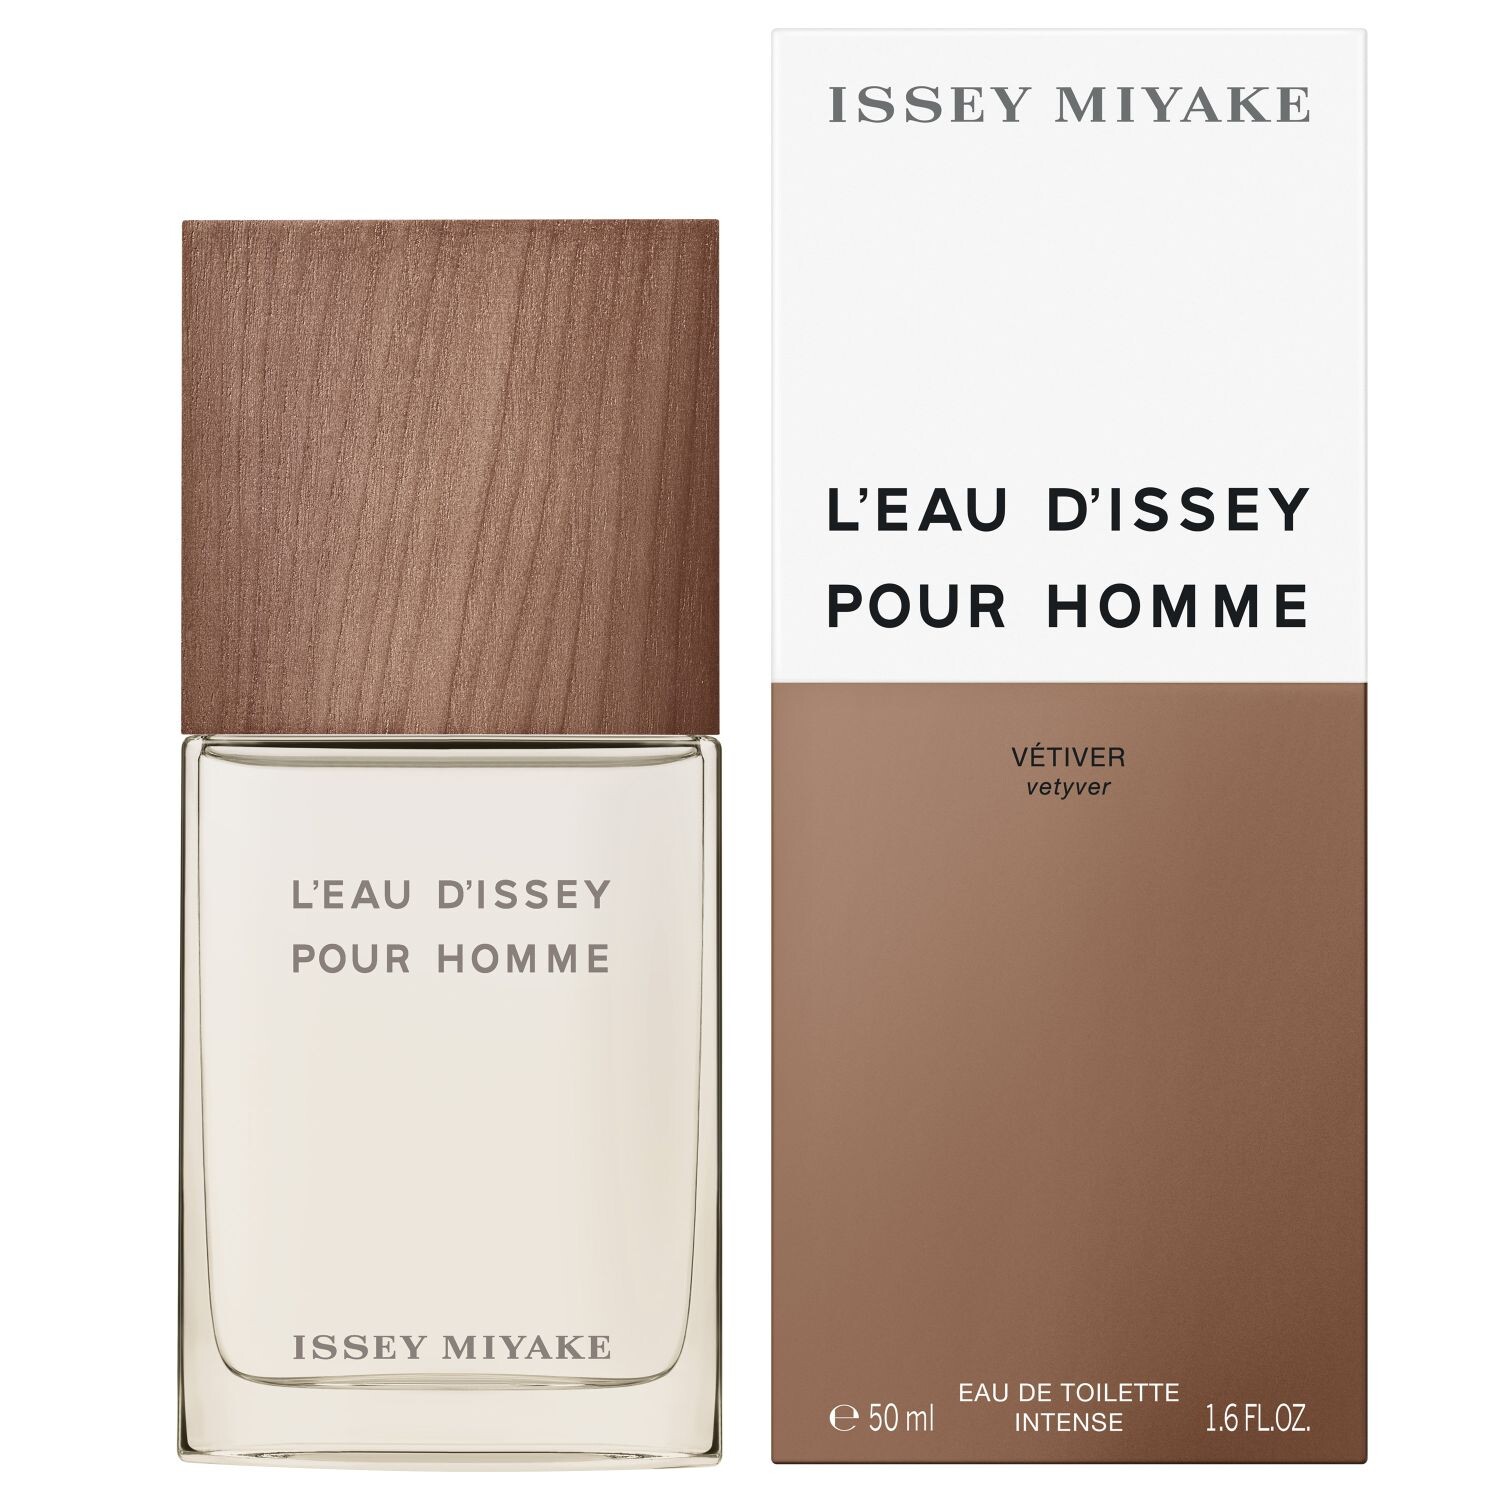 Issey Miyake L'Eau d'Issey pour Homme Vétiver EDT 100ml